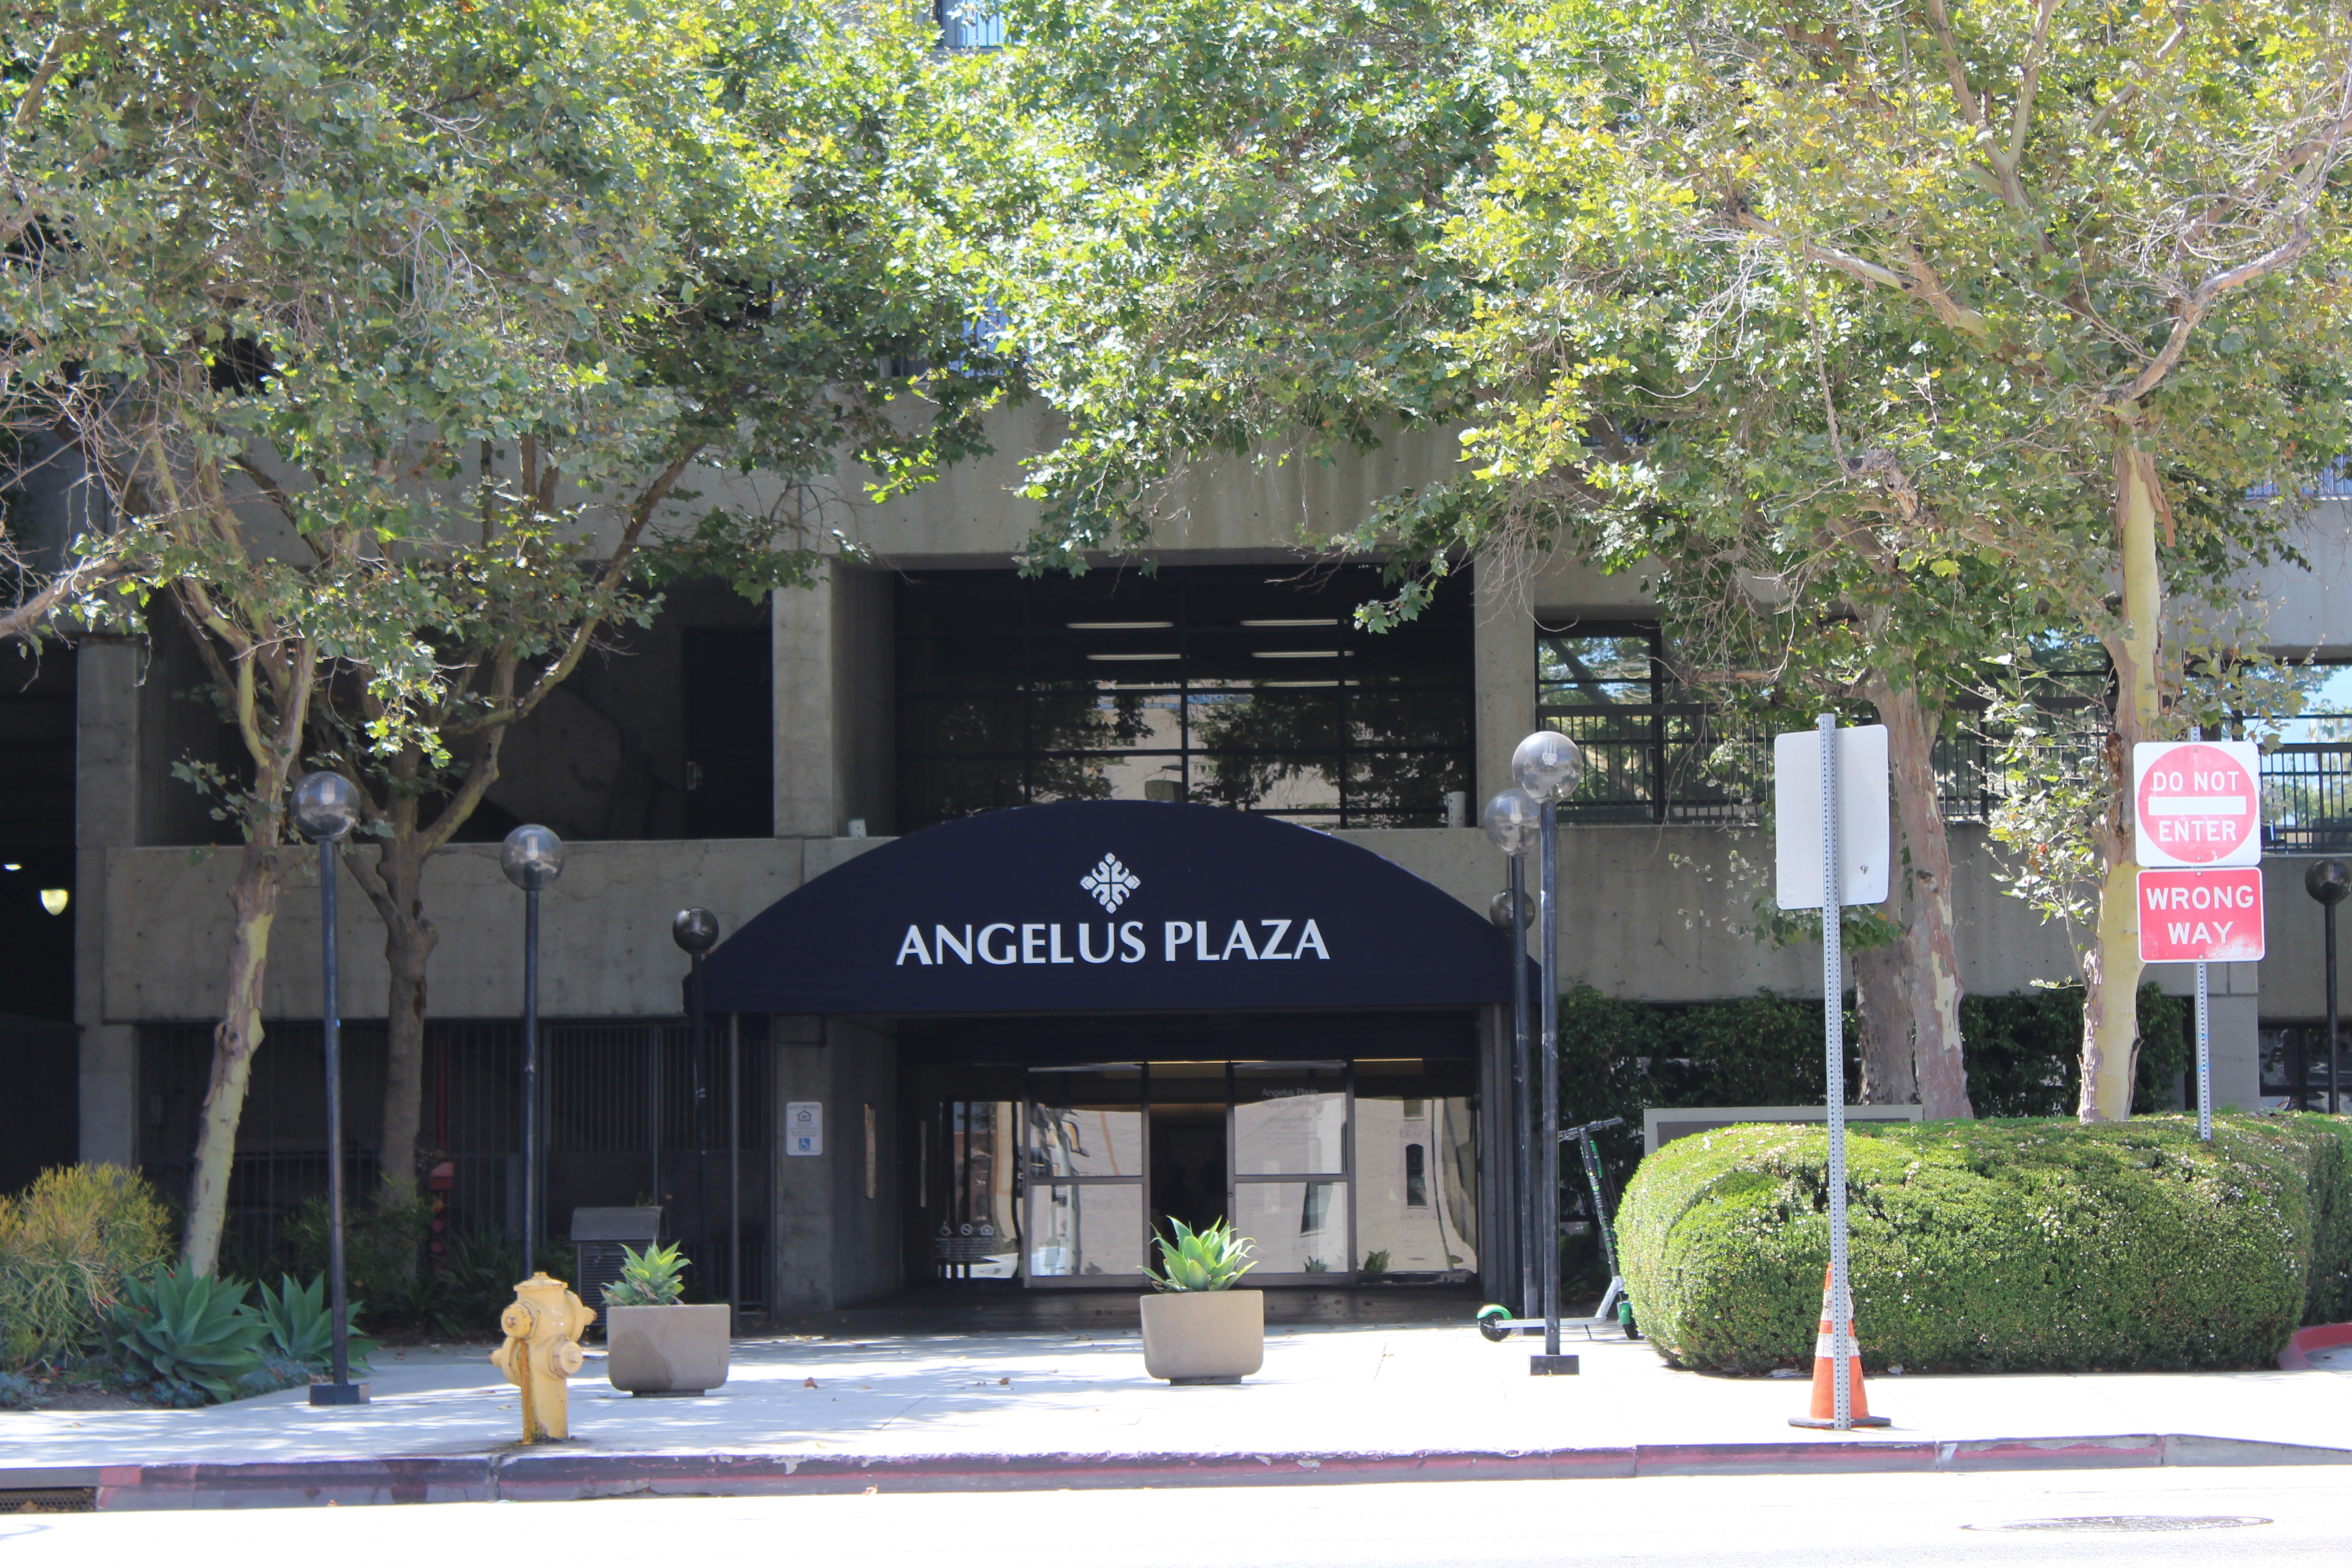 Street view of Angelus Plaza 1 entryway. Three lamp post on either side of the walk way with trees and bushes boarding it. Navy blue awning with white lettering